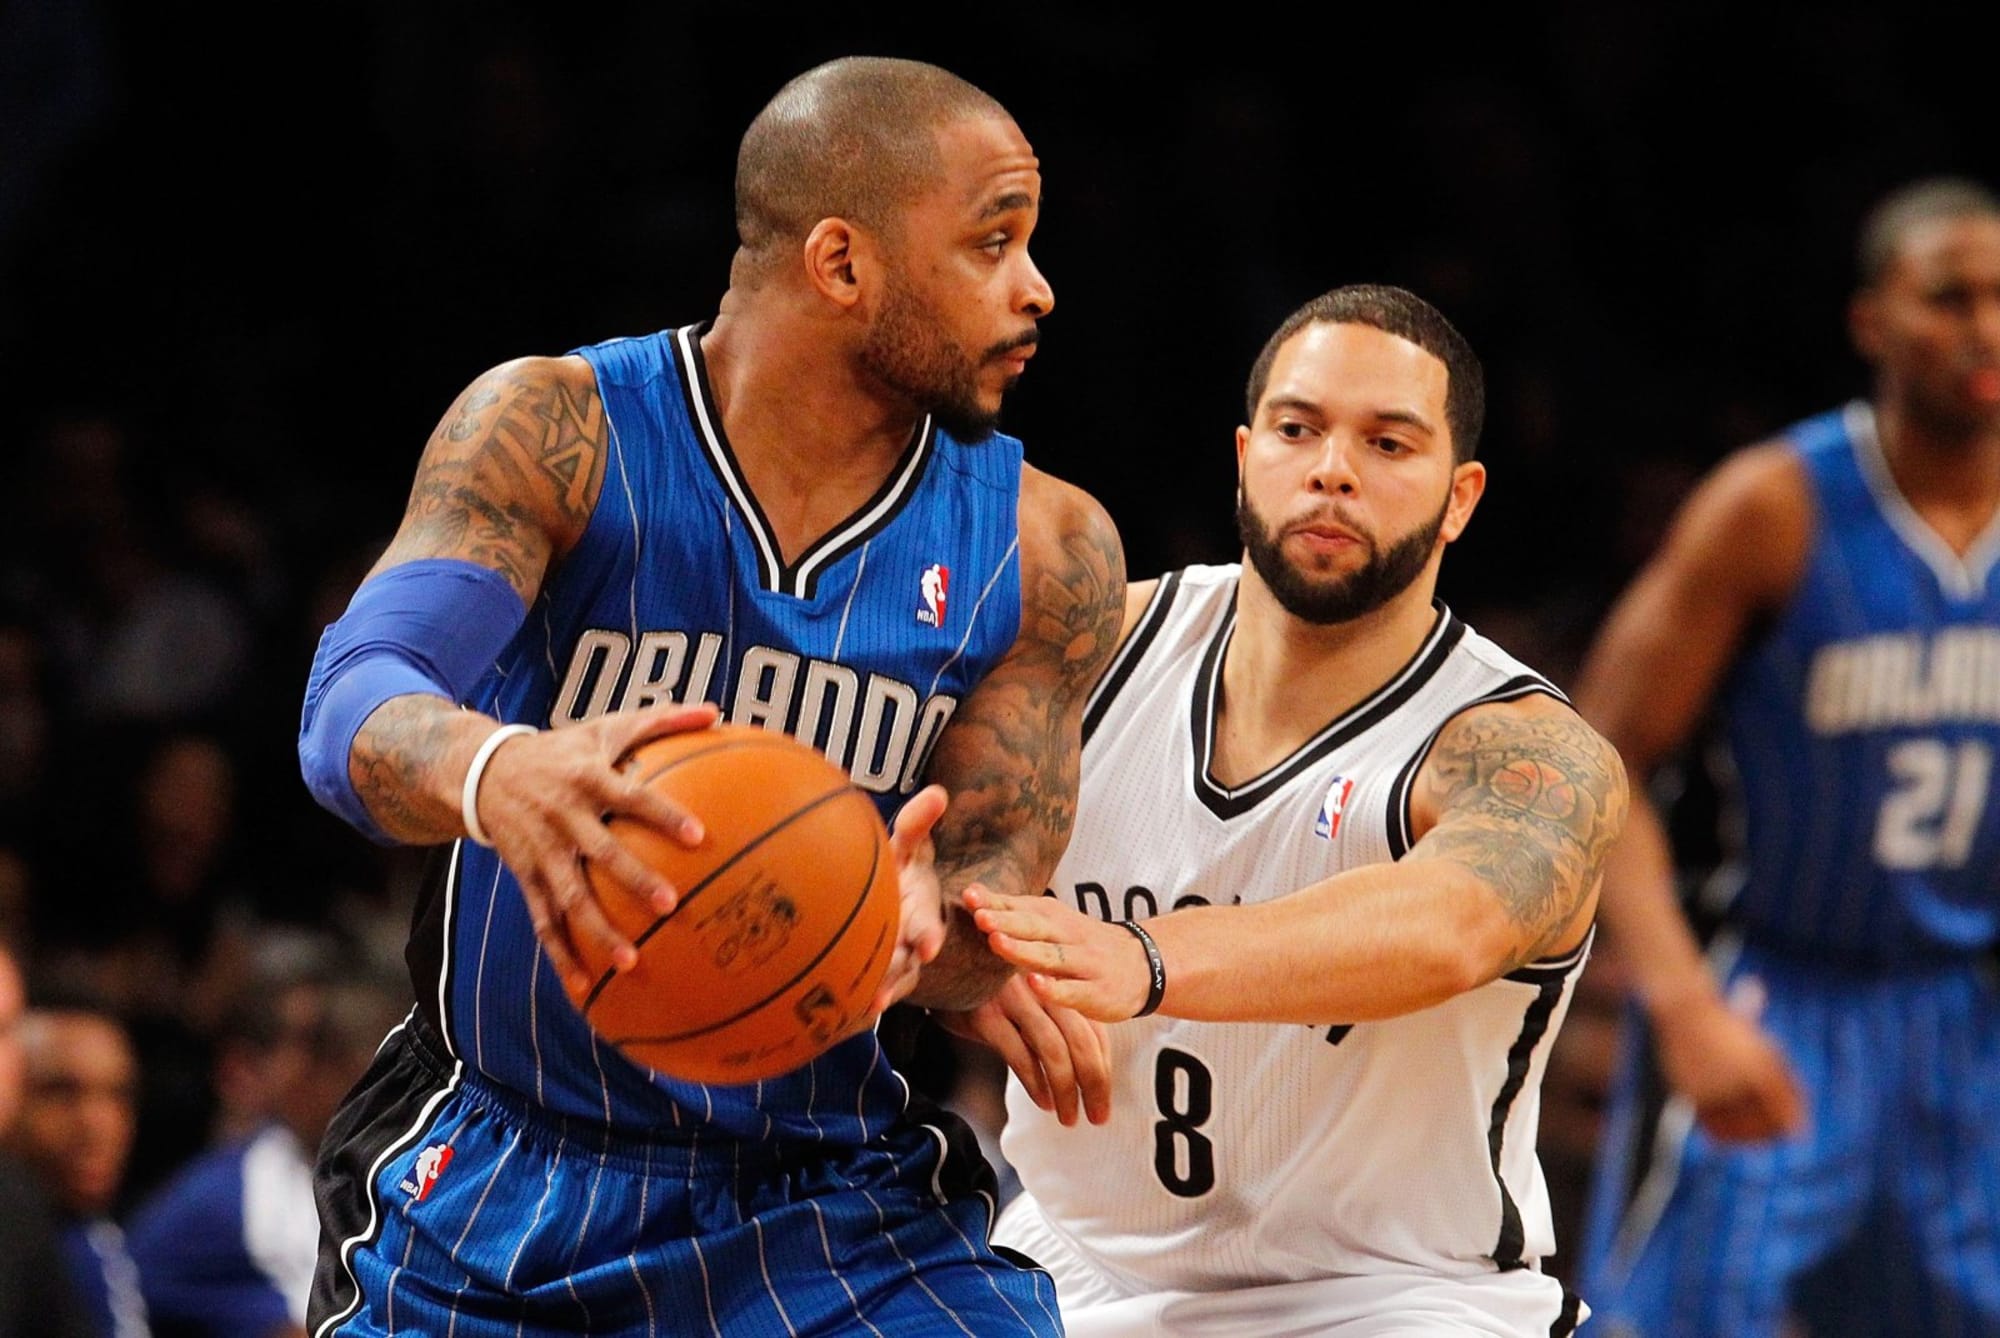 Jameer Nelson's son shows off his incredible dunking skills